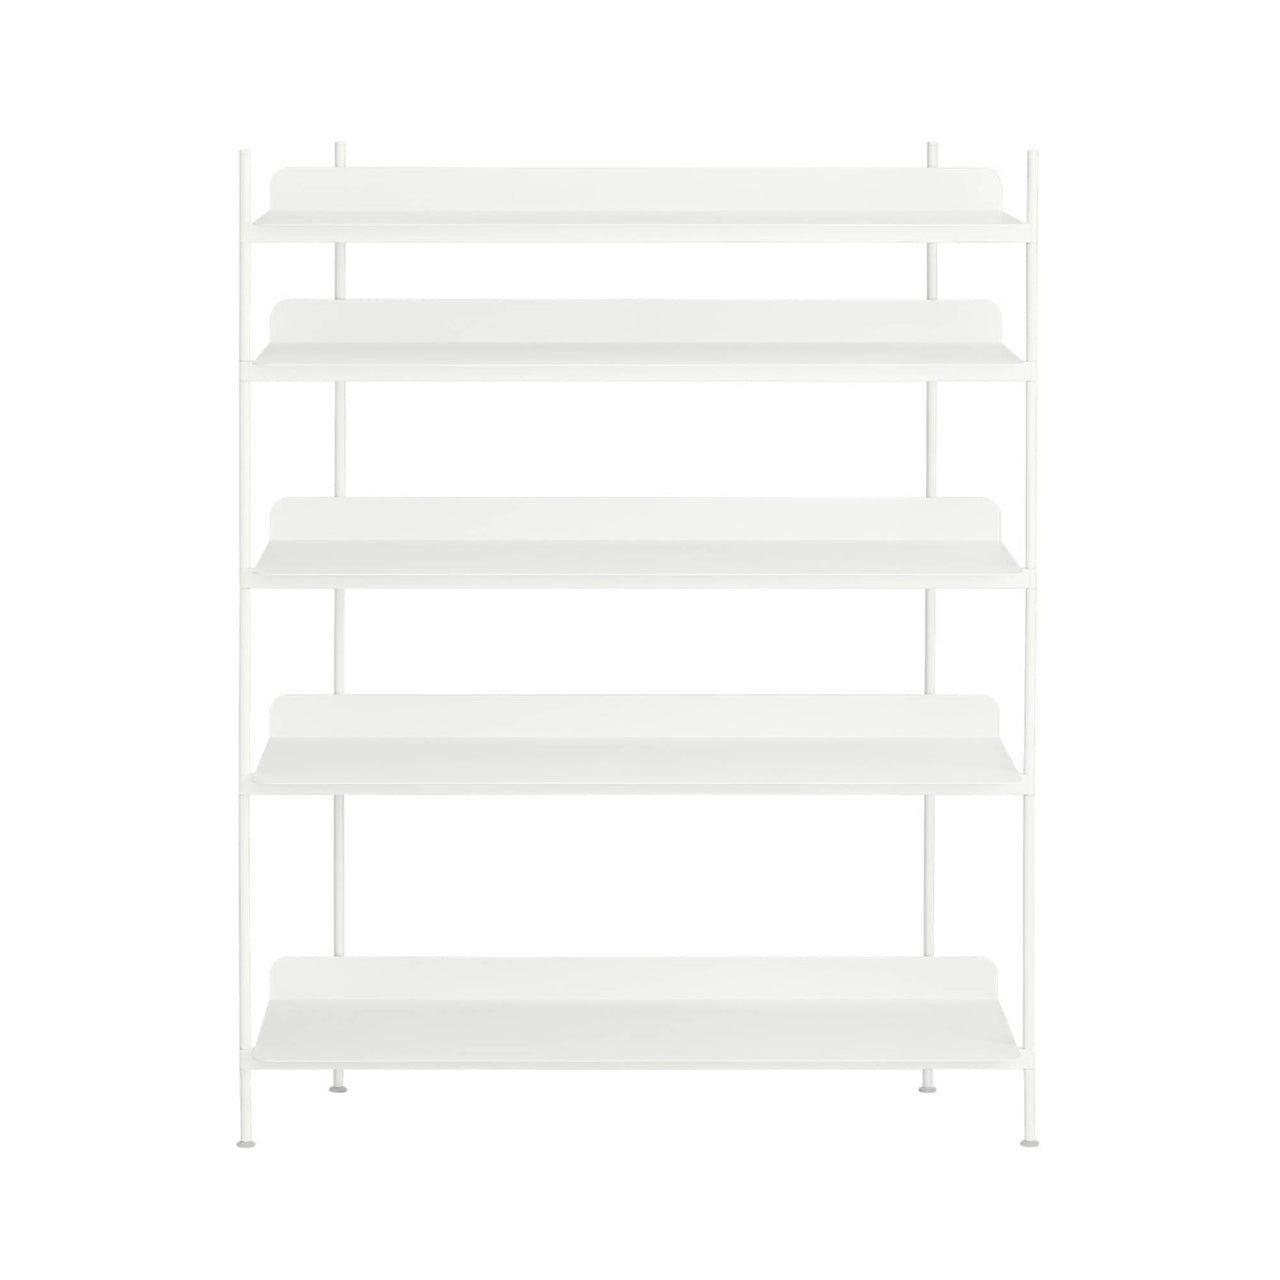 Compile Shelving System: Configuration 3 + White